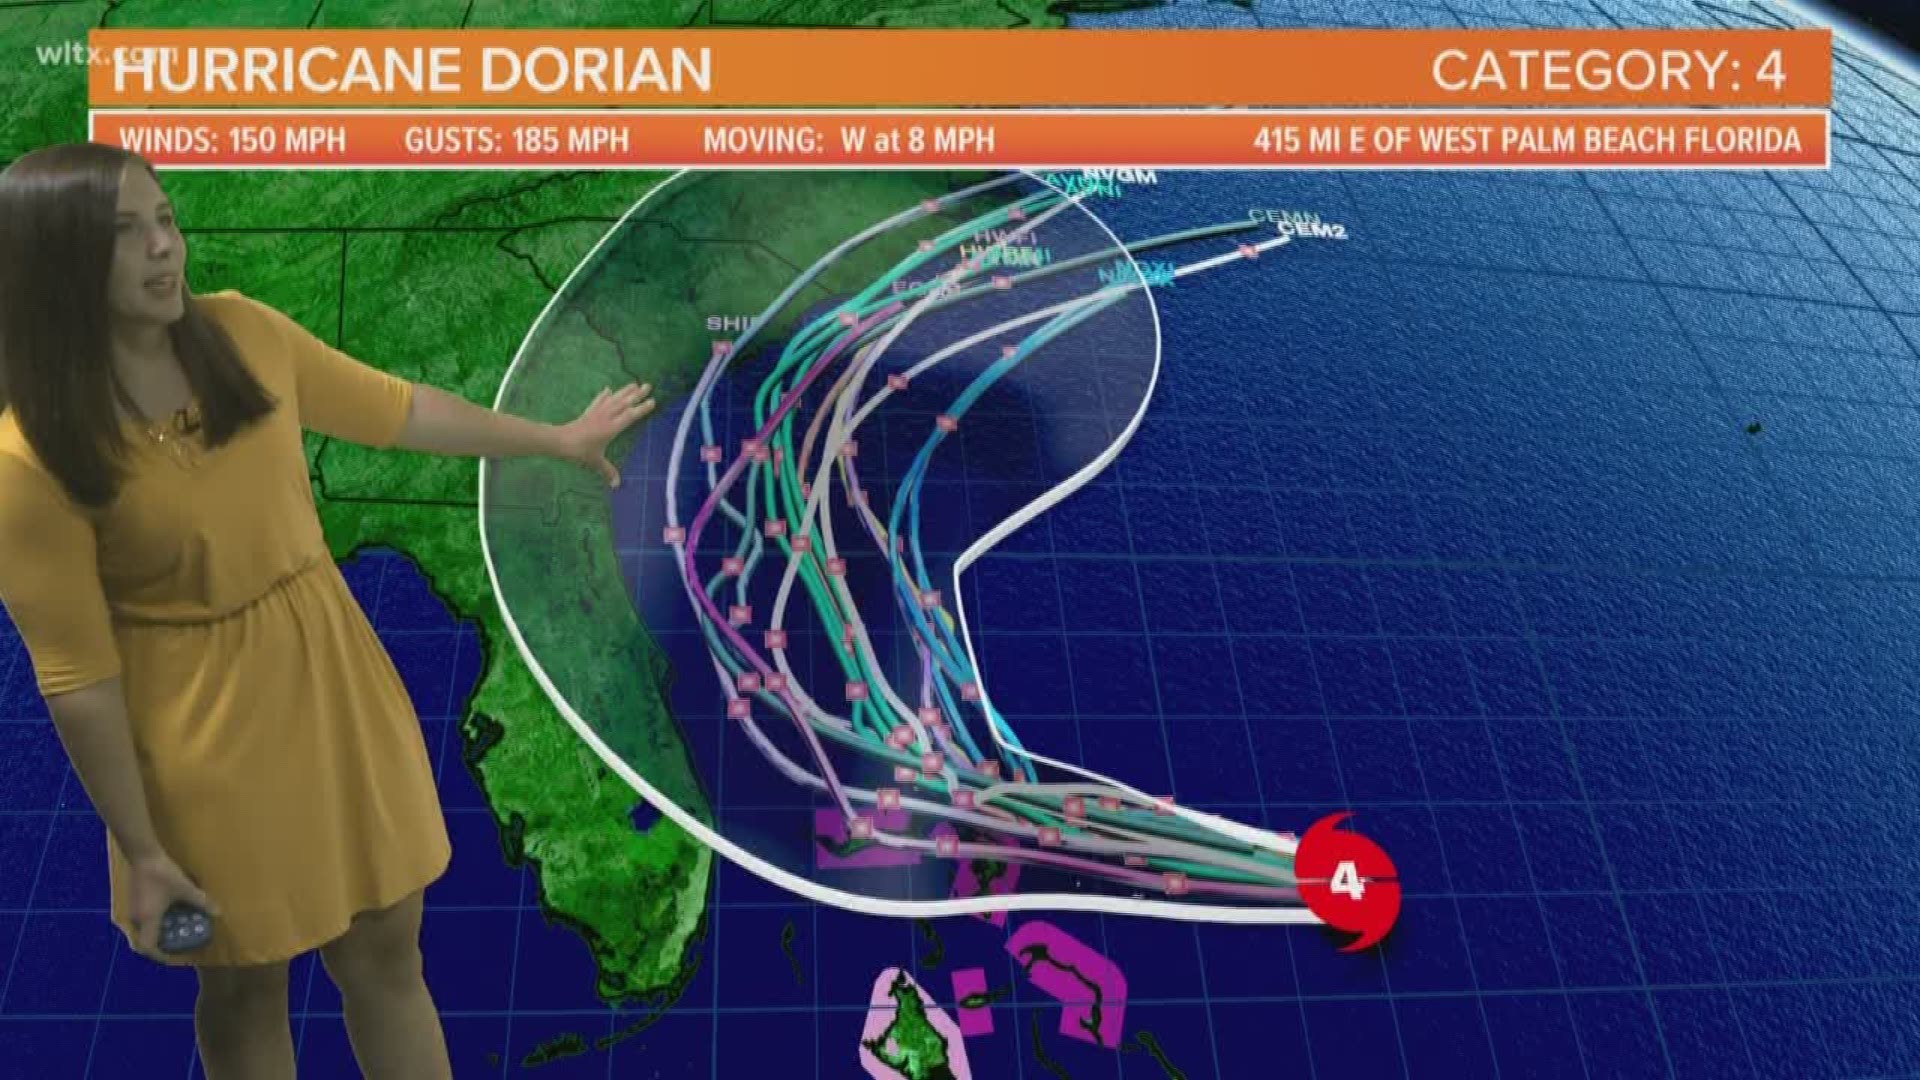 Hurricane Dorian remains an extremely dangerous Category 4 hurricane and is slowing down, according to the latest update form the National Hurricane Center.